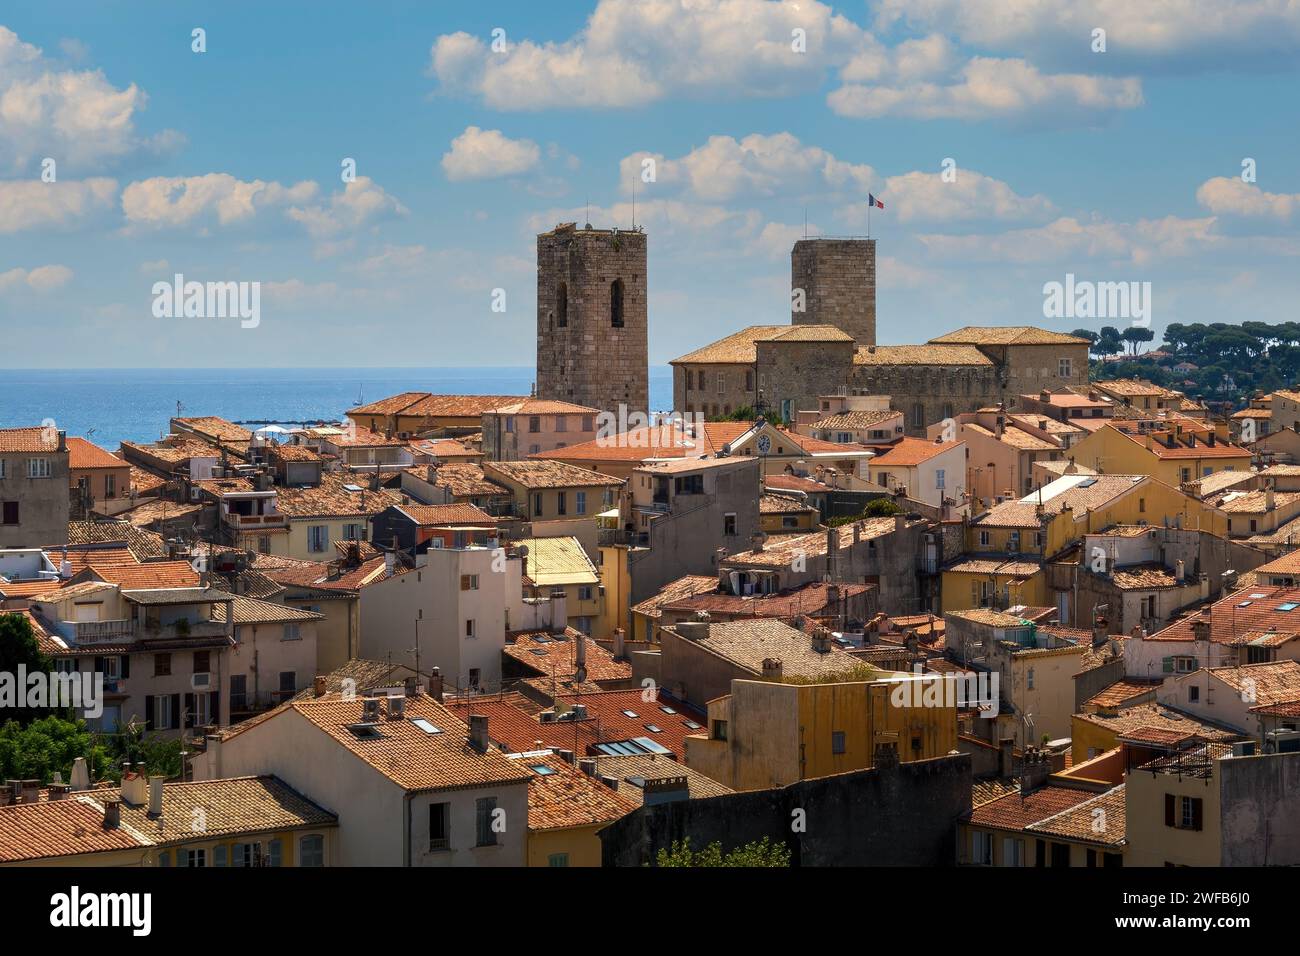 Aerial view of the red roofs, old houses and medieval towers of the old city of Antibes, France. Stock Photo